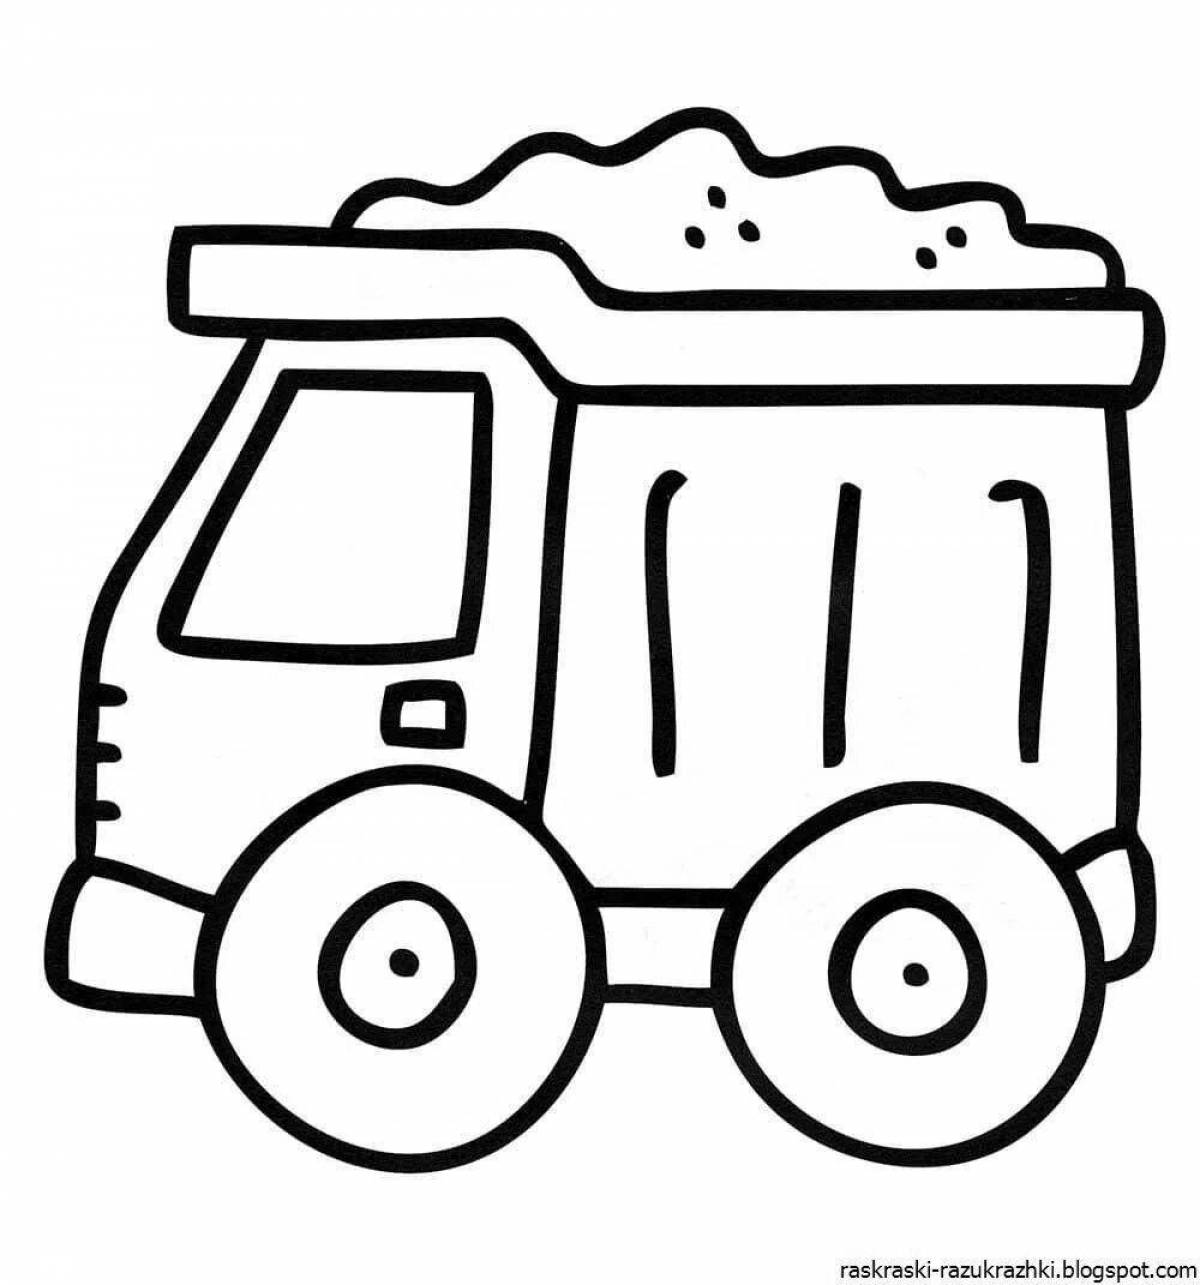 Coloring game wonderful cars for boys 3-4 years old